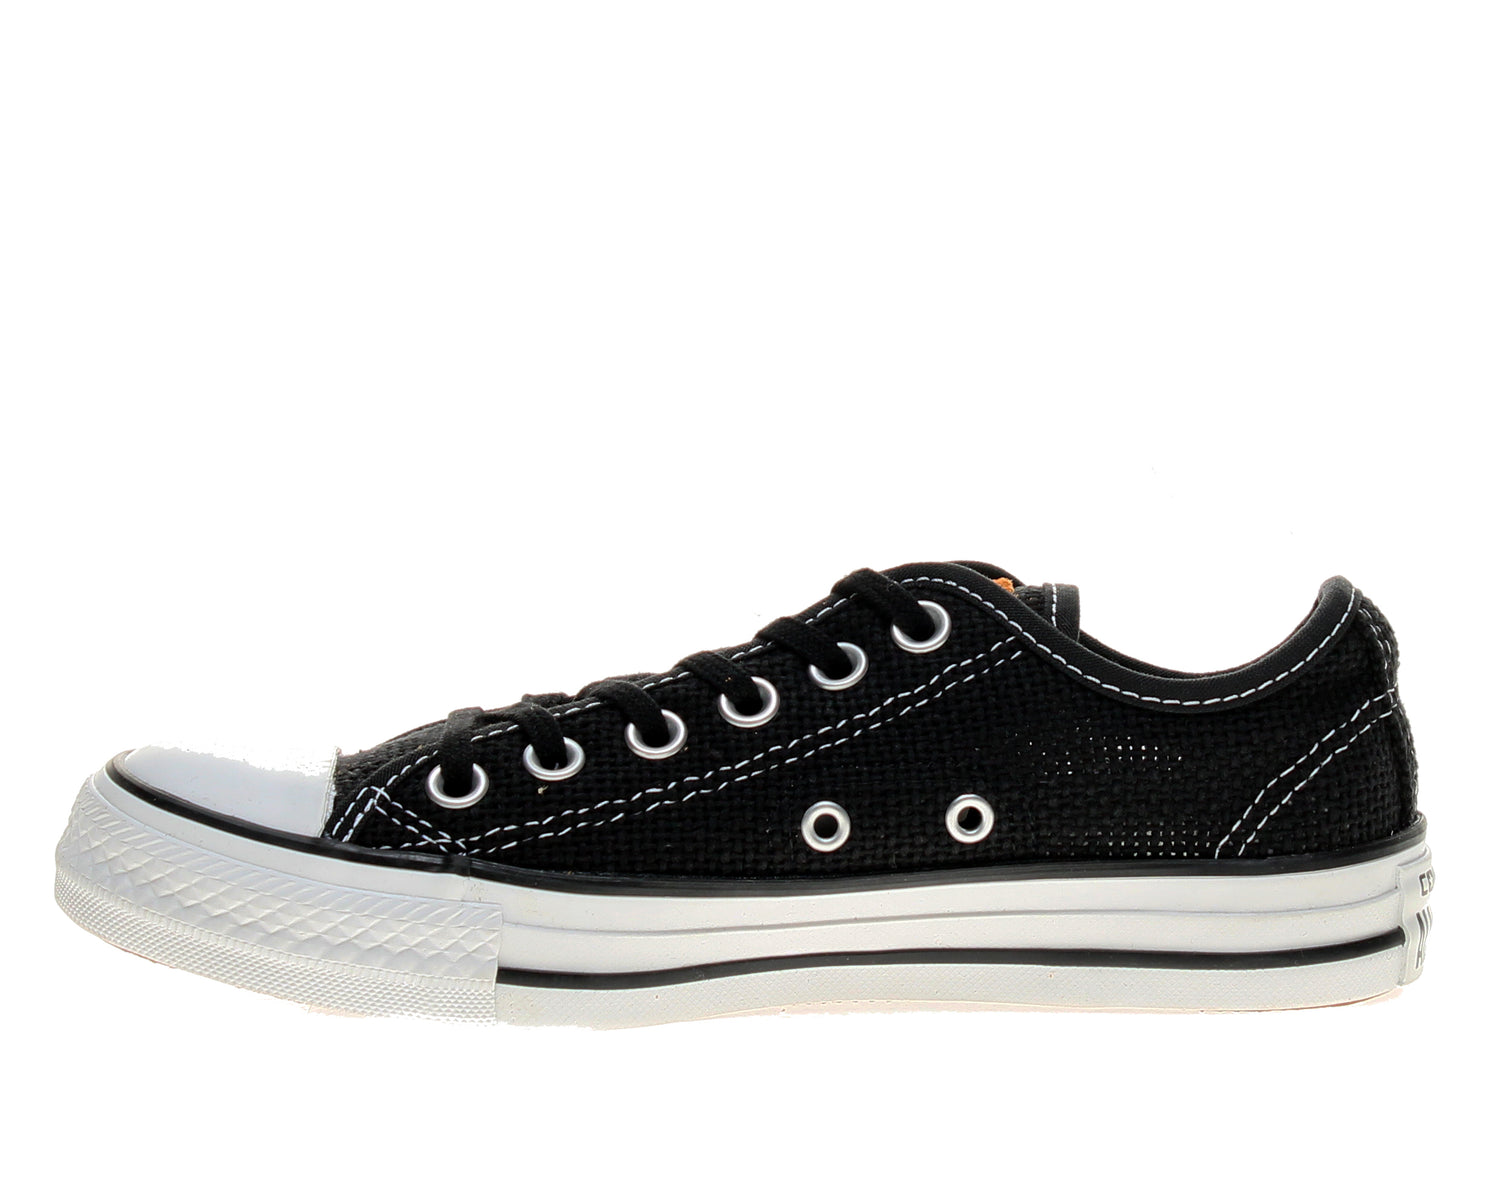 Converse Chuck Taylor All Star OX Woven Low Top Sneakers